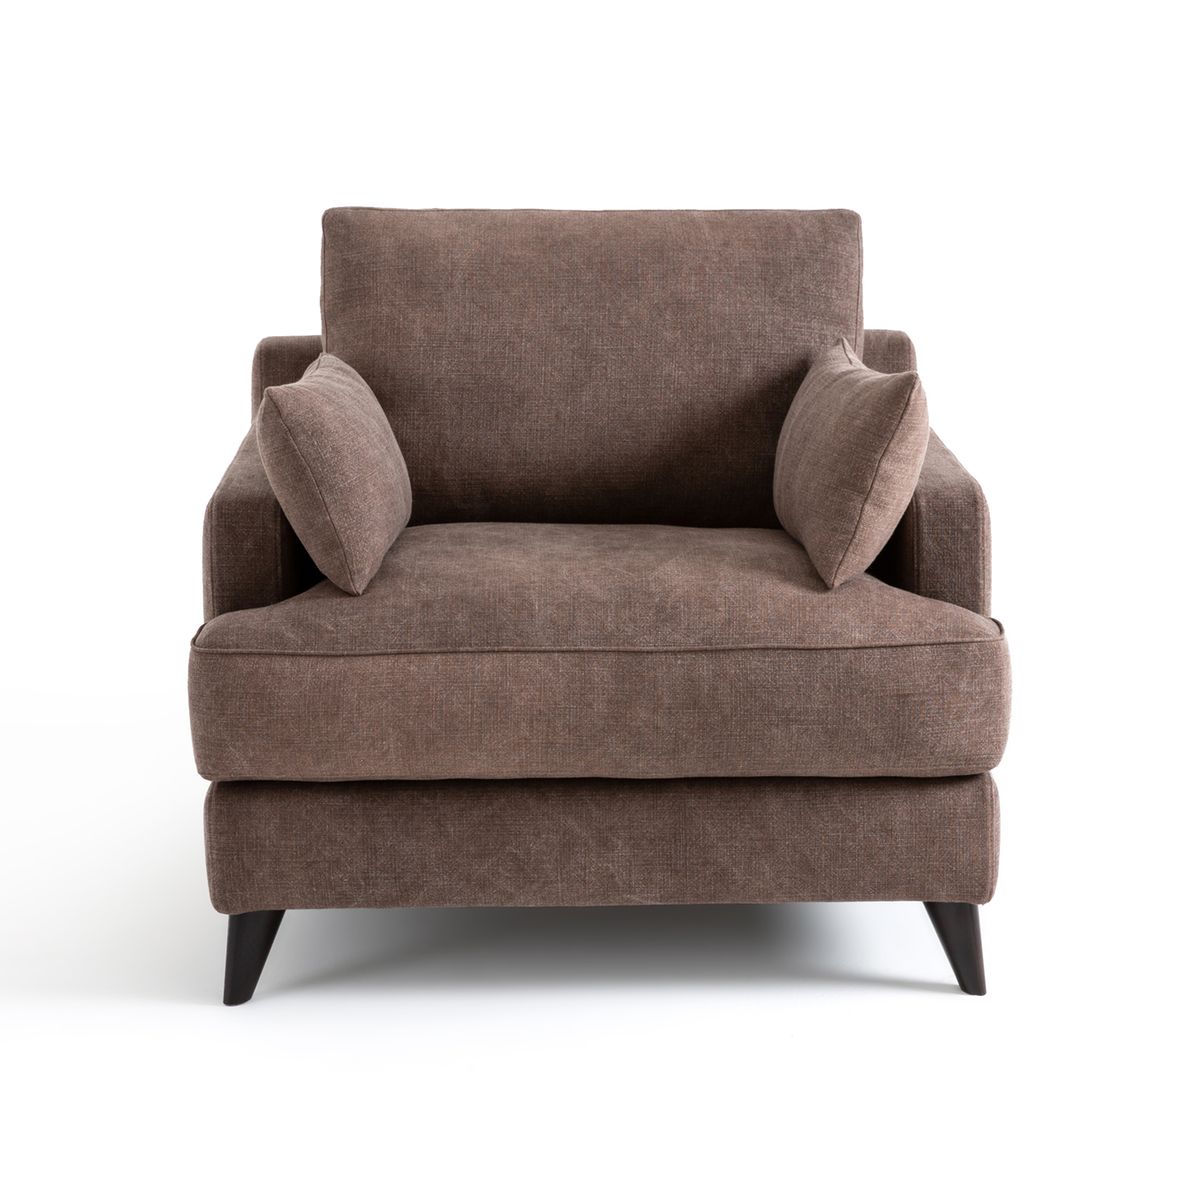 Fauteuil lin stonewashed, Alwine